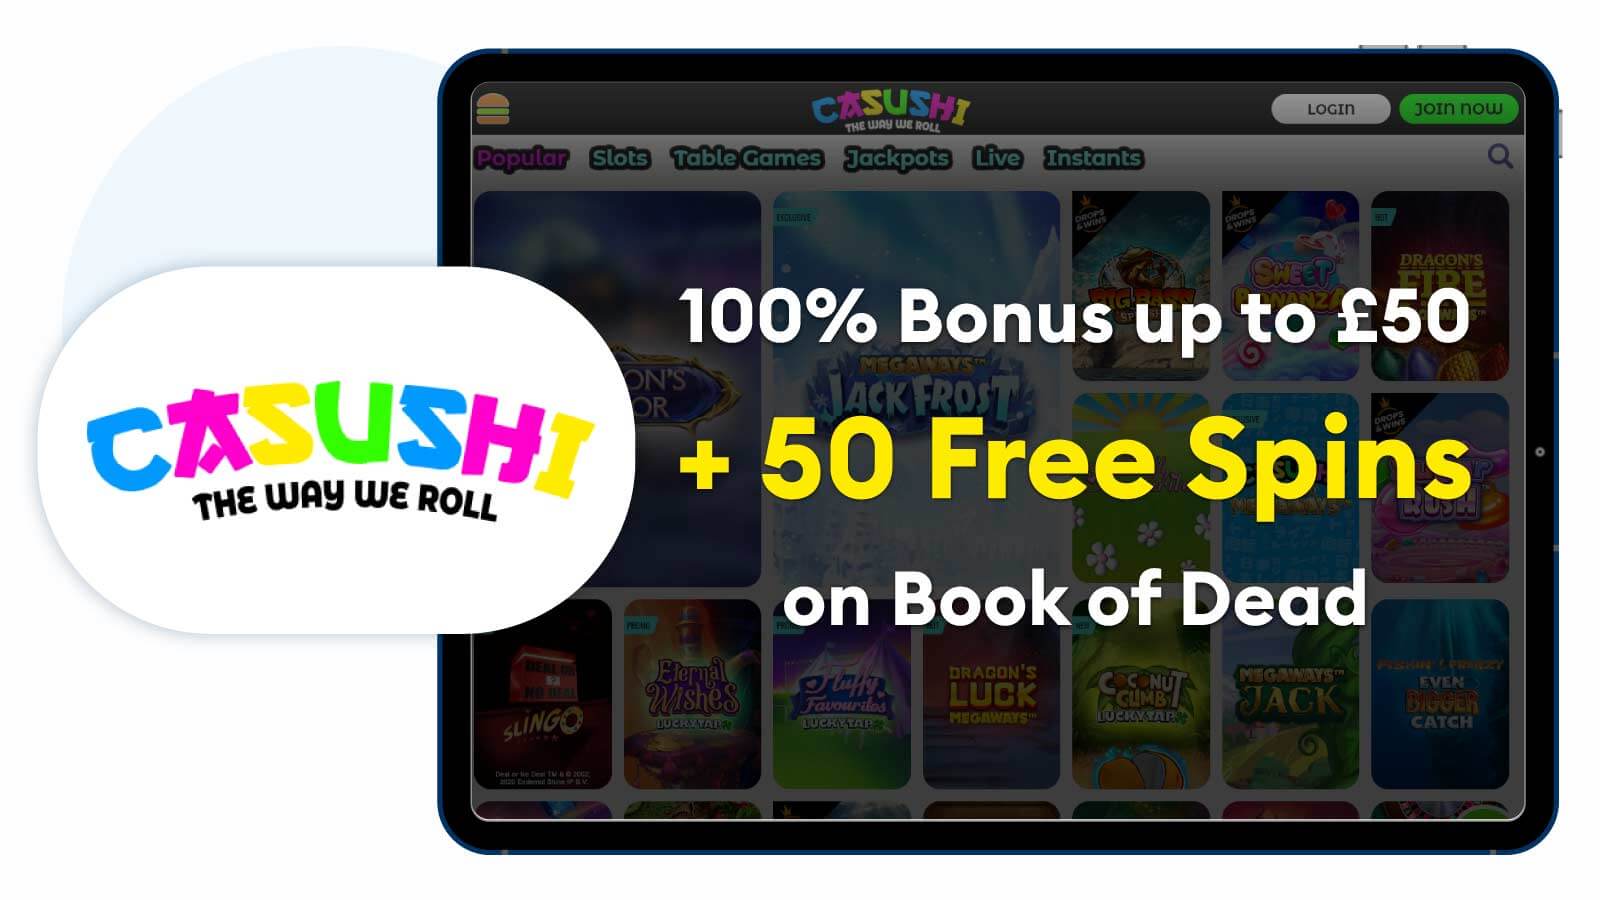 Casushi Casino 100% Bonus Up to £50 + 50 Free Spins on Book of Dead